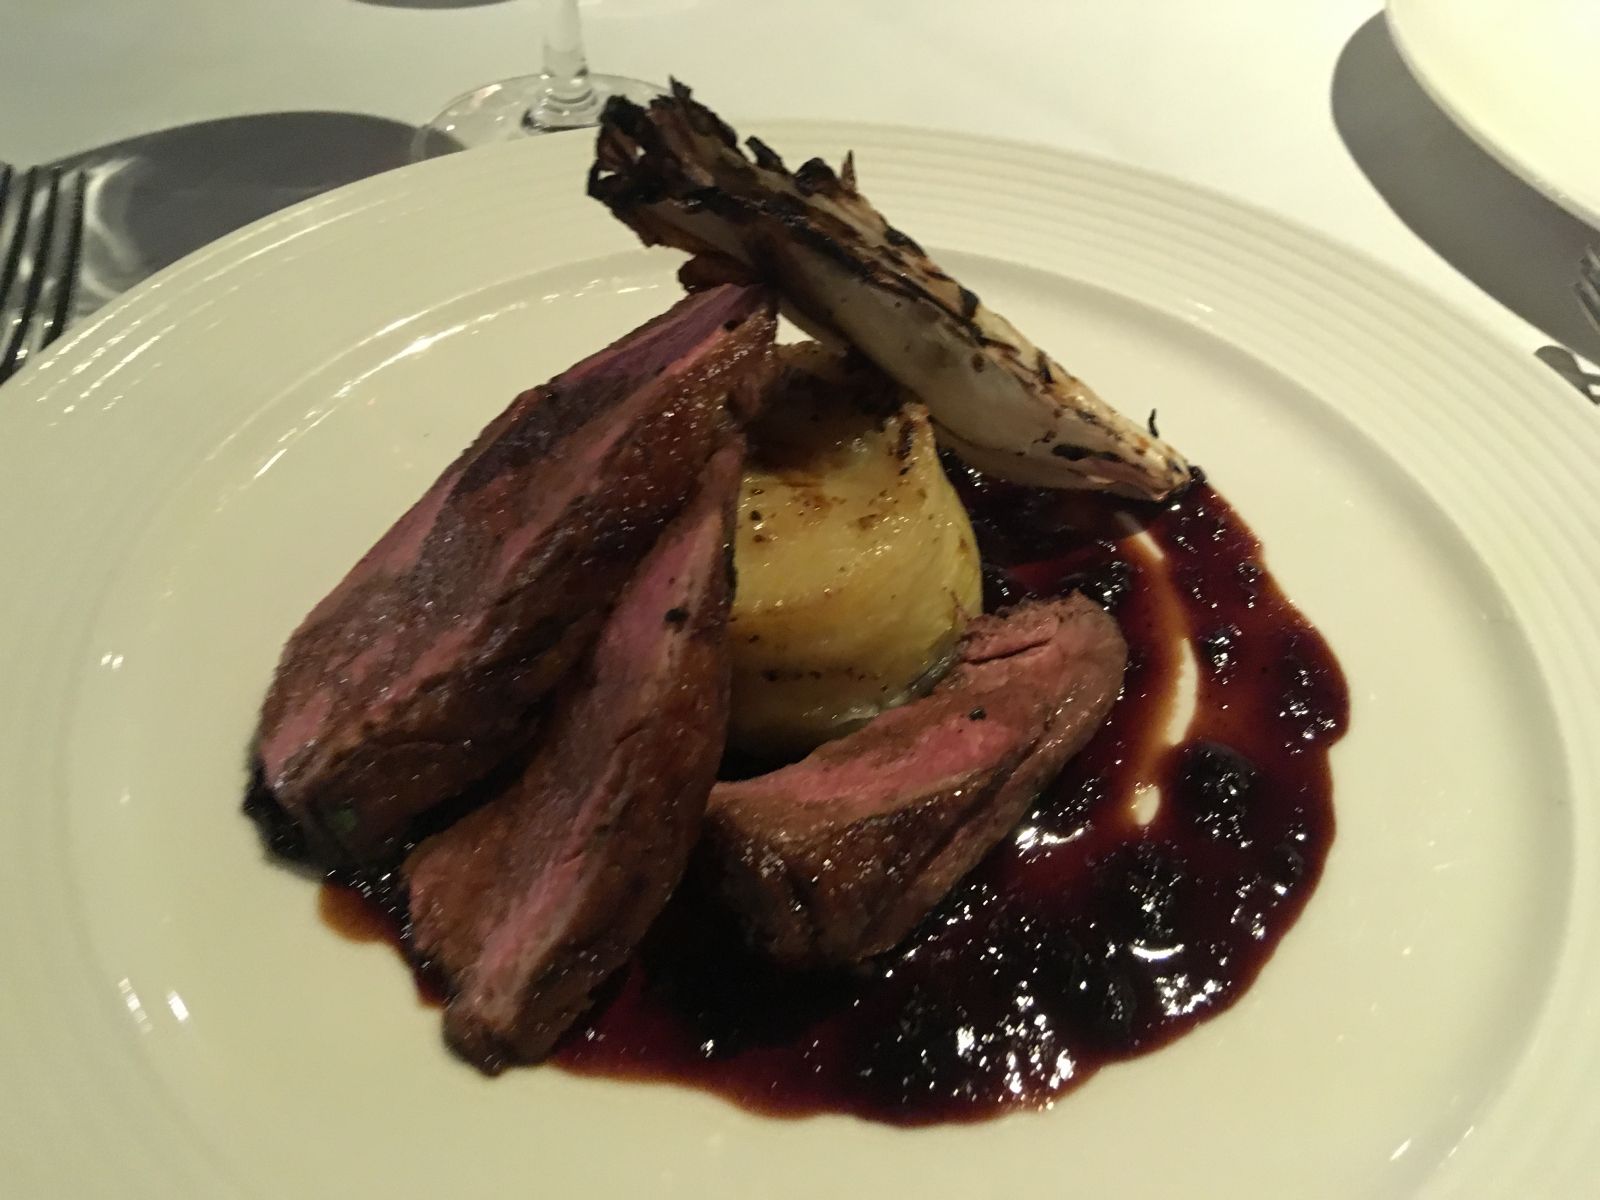 Pan-roasted duck breast with dauphinoise potatoes at Aqua Bristol.